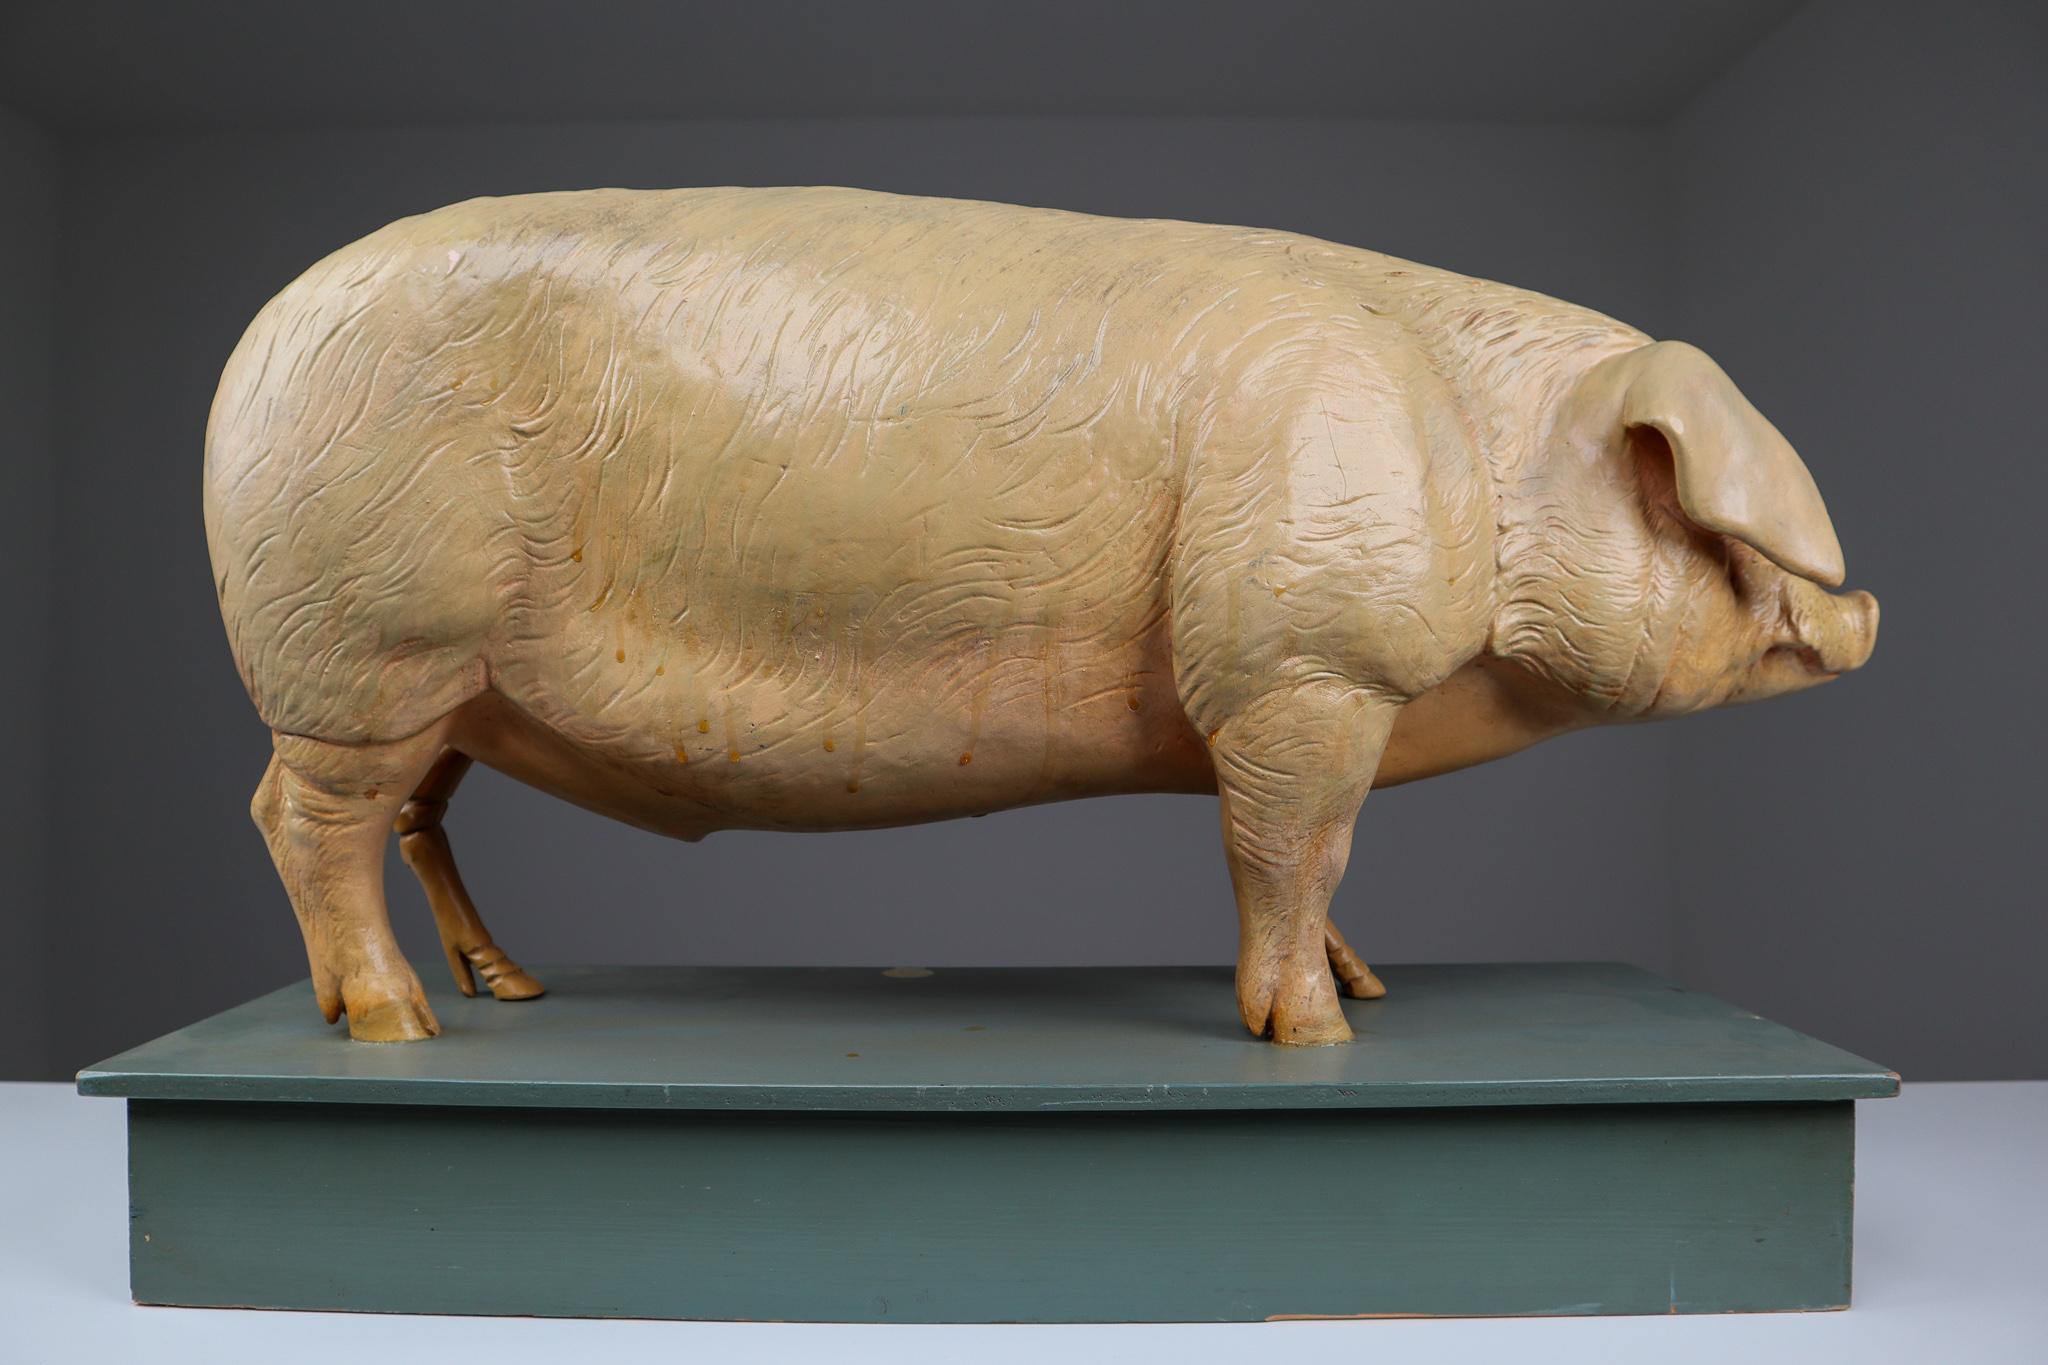 Bauhaus Antique Anatomical Model of a Pig Germany, 1930s